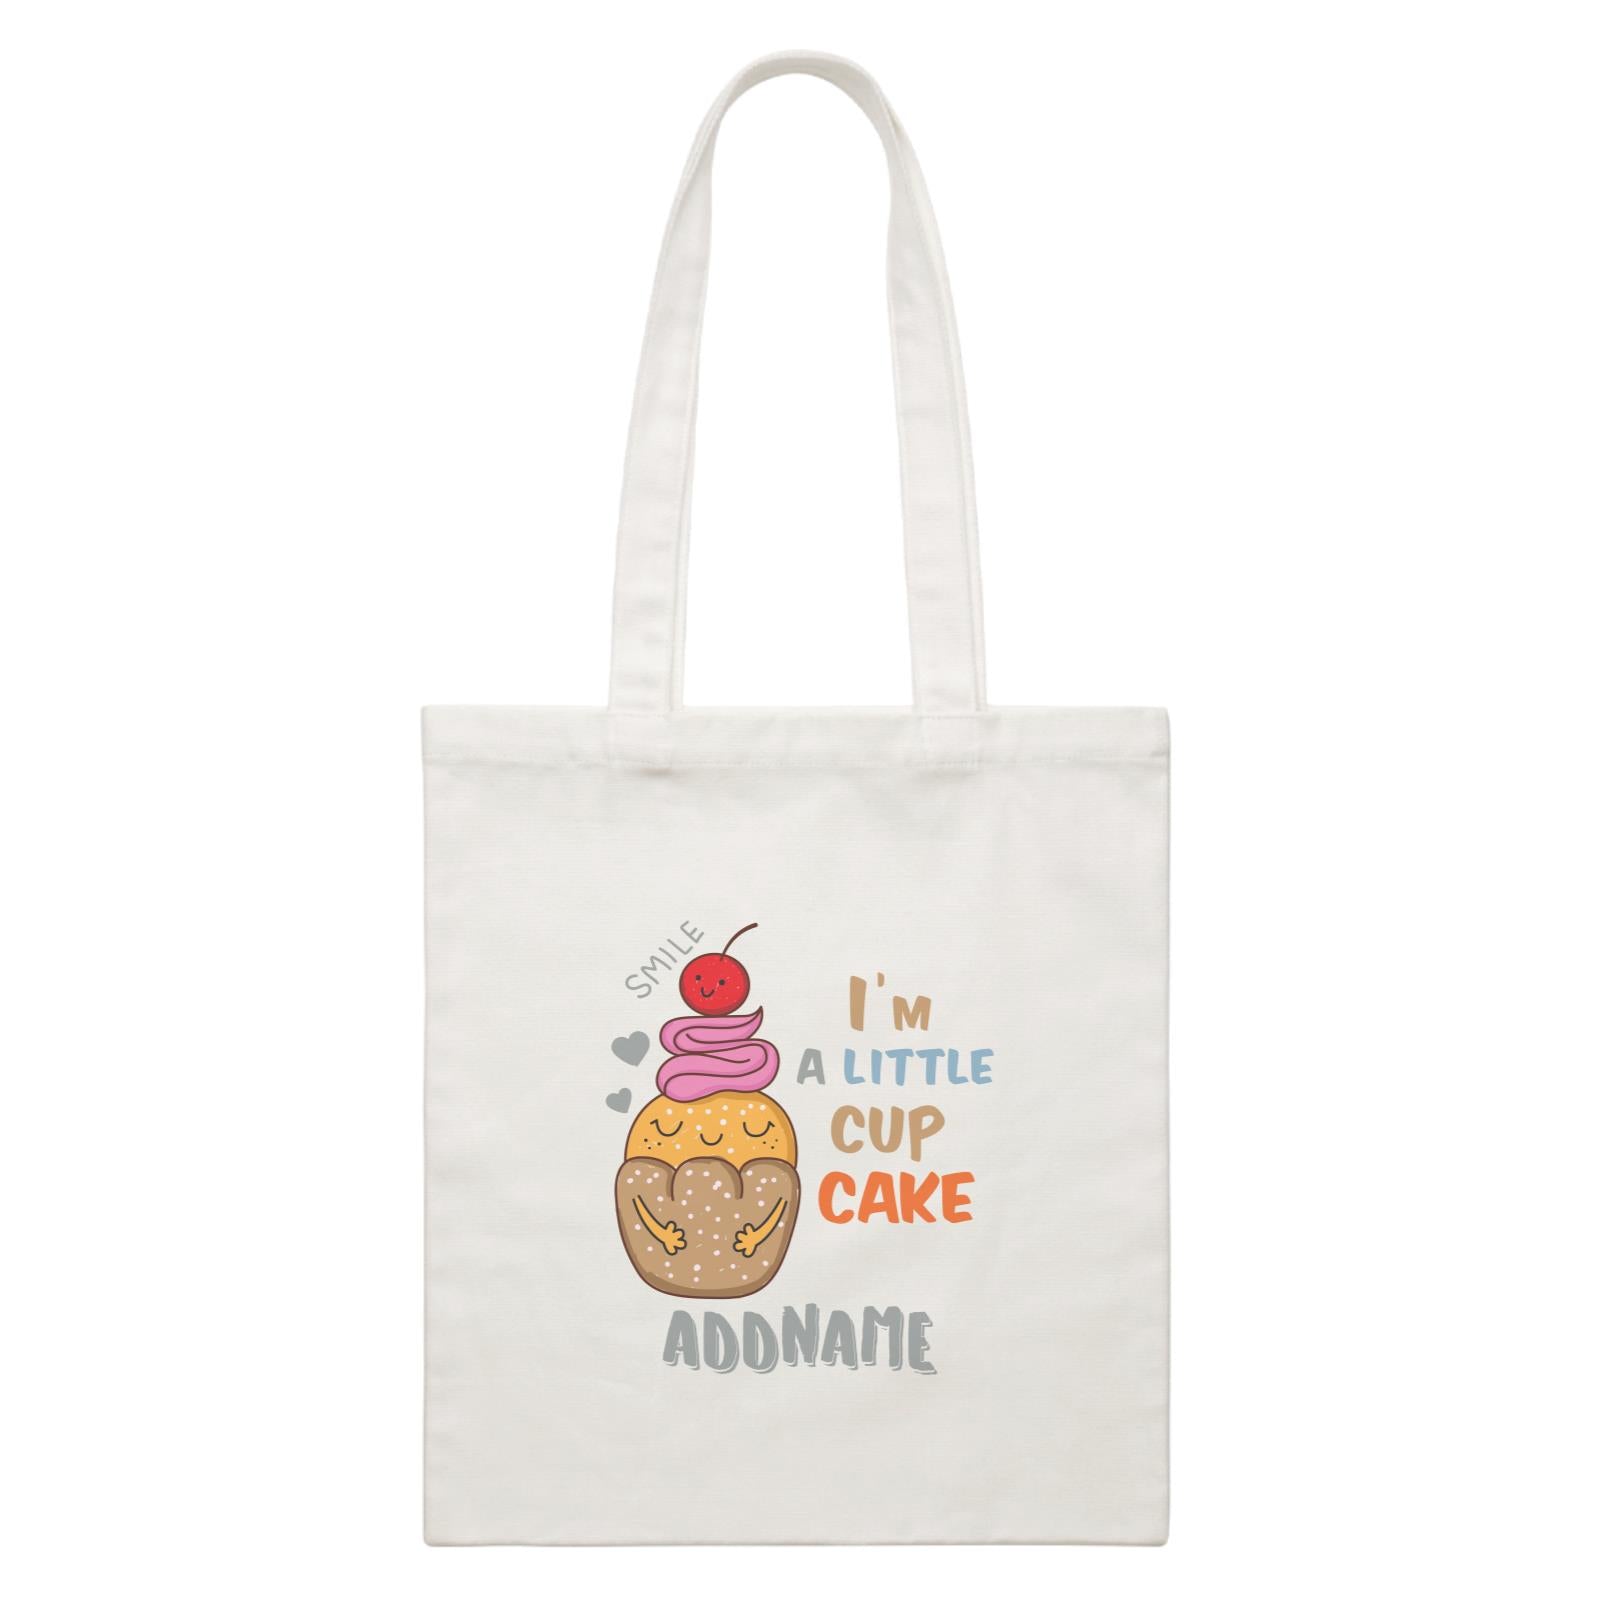 Cool Cute Foods I'm A Little Cup Cake Addname White Canvas Bag